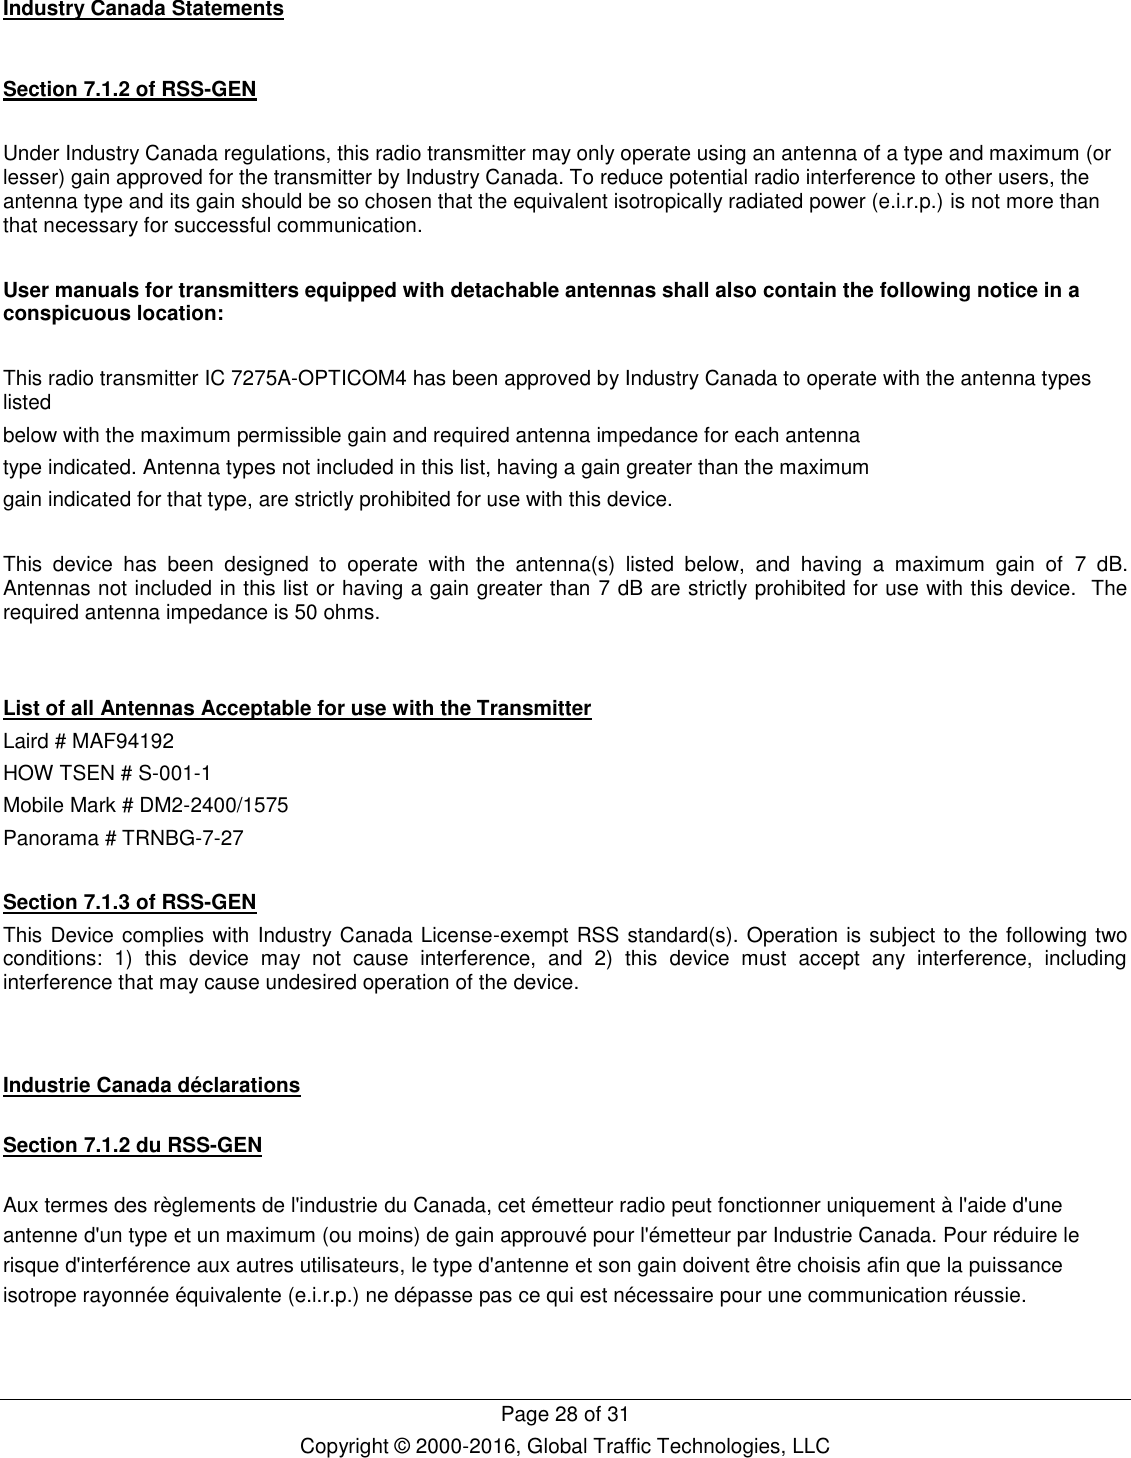   Page 28 of 31 Copyright © 2000-2016, Global Traffic Technologies, LLC Industry Canada Statements  Section 7.1.2 of RSS-GEN  Under Industry Canada regulations, this radio transmitter may only operate using an antenna of a type and maximum (or lesser) gain approved for the transmitter by Industry Canada. To reduce potential radio interference to other users, the antenna type and its gain should be so chosen that the equivalent isotropically radiated power (e.i.r.p.) is not more than that necessary for successful communication.  User manuals for transmitters equipped with detachable antennas shall also contain the following notice in a conspicuous location:  This radio transmitter IC 7275A-OPTICOM4 has been approved by Industry Canada to operate with the antenna types listed below with the maximum permissible gain and required antenna impedance for each antenna type indicated. Antenna types not included in this list, having a gain greater than the maximum gain indicated for that type, are strictly prohibited for use with this device.  This  device  has  been  designed  to  operate  with  the  antenna(s)  listed  below,  and  having  a  maximum  gain  of  7 dB.  Antennas not included in this list or having a gain greater than 7 dB are strictly prohibited for use with this device.  The required antenna impedance is 50 ohms.   List of all Antennas Acceptable for use with the Transmitter Laird # MAF94192 HOW TSEN # S-001-1 Mobile Mark # DM2-2400/1575  Panorama # TRNBG-7-27  Section 7.1.3 of RSS-GEN This Device complies with Industry Canada License-exempt RSS standard(s). Operation is subject to the following two conditions:  1)  this  device  may  not  cause  interference,  and  2)  this  device  must  accept  any  interference,  including interference that may cause undesired operation of the device.   Industrie Canada déclarations  Section 7.1.2 du RSS-GEN  Aux termes des règlements de l&apos;industrie du Canada, cet émetteur radio peut fonctionner uniquement à l&apos;aide d&apos;une antenne d&apos;un type et un maximum (ou moins) de gain approuvé pour l&apos;émetteur par Industrie Canada. Pour réduire le risque d&apos;interférence aux autres utilisateurs, le type d&apos;antenne et son gain doivent être choisis afin que la puissance isotrope rayonnée équivalente (e.i.r.p.) ne dépasse pas ce qui est nécessaire pour une communication réussie.  